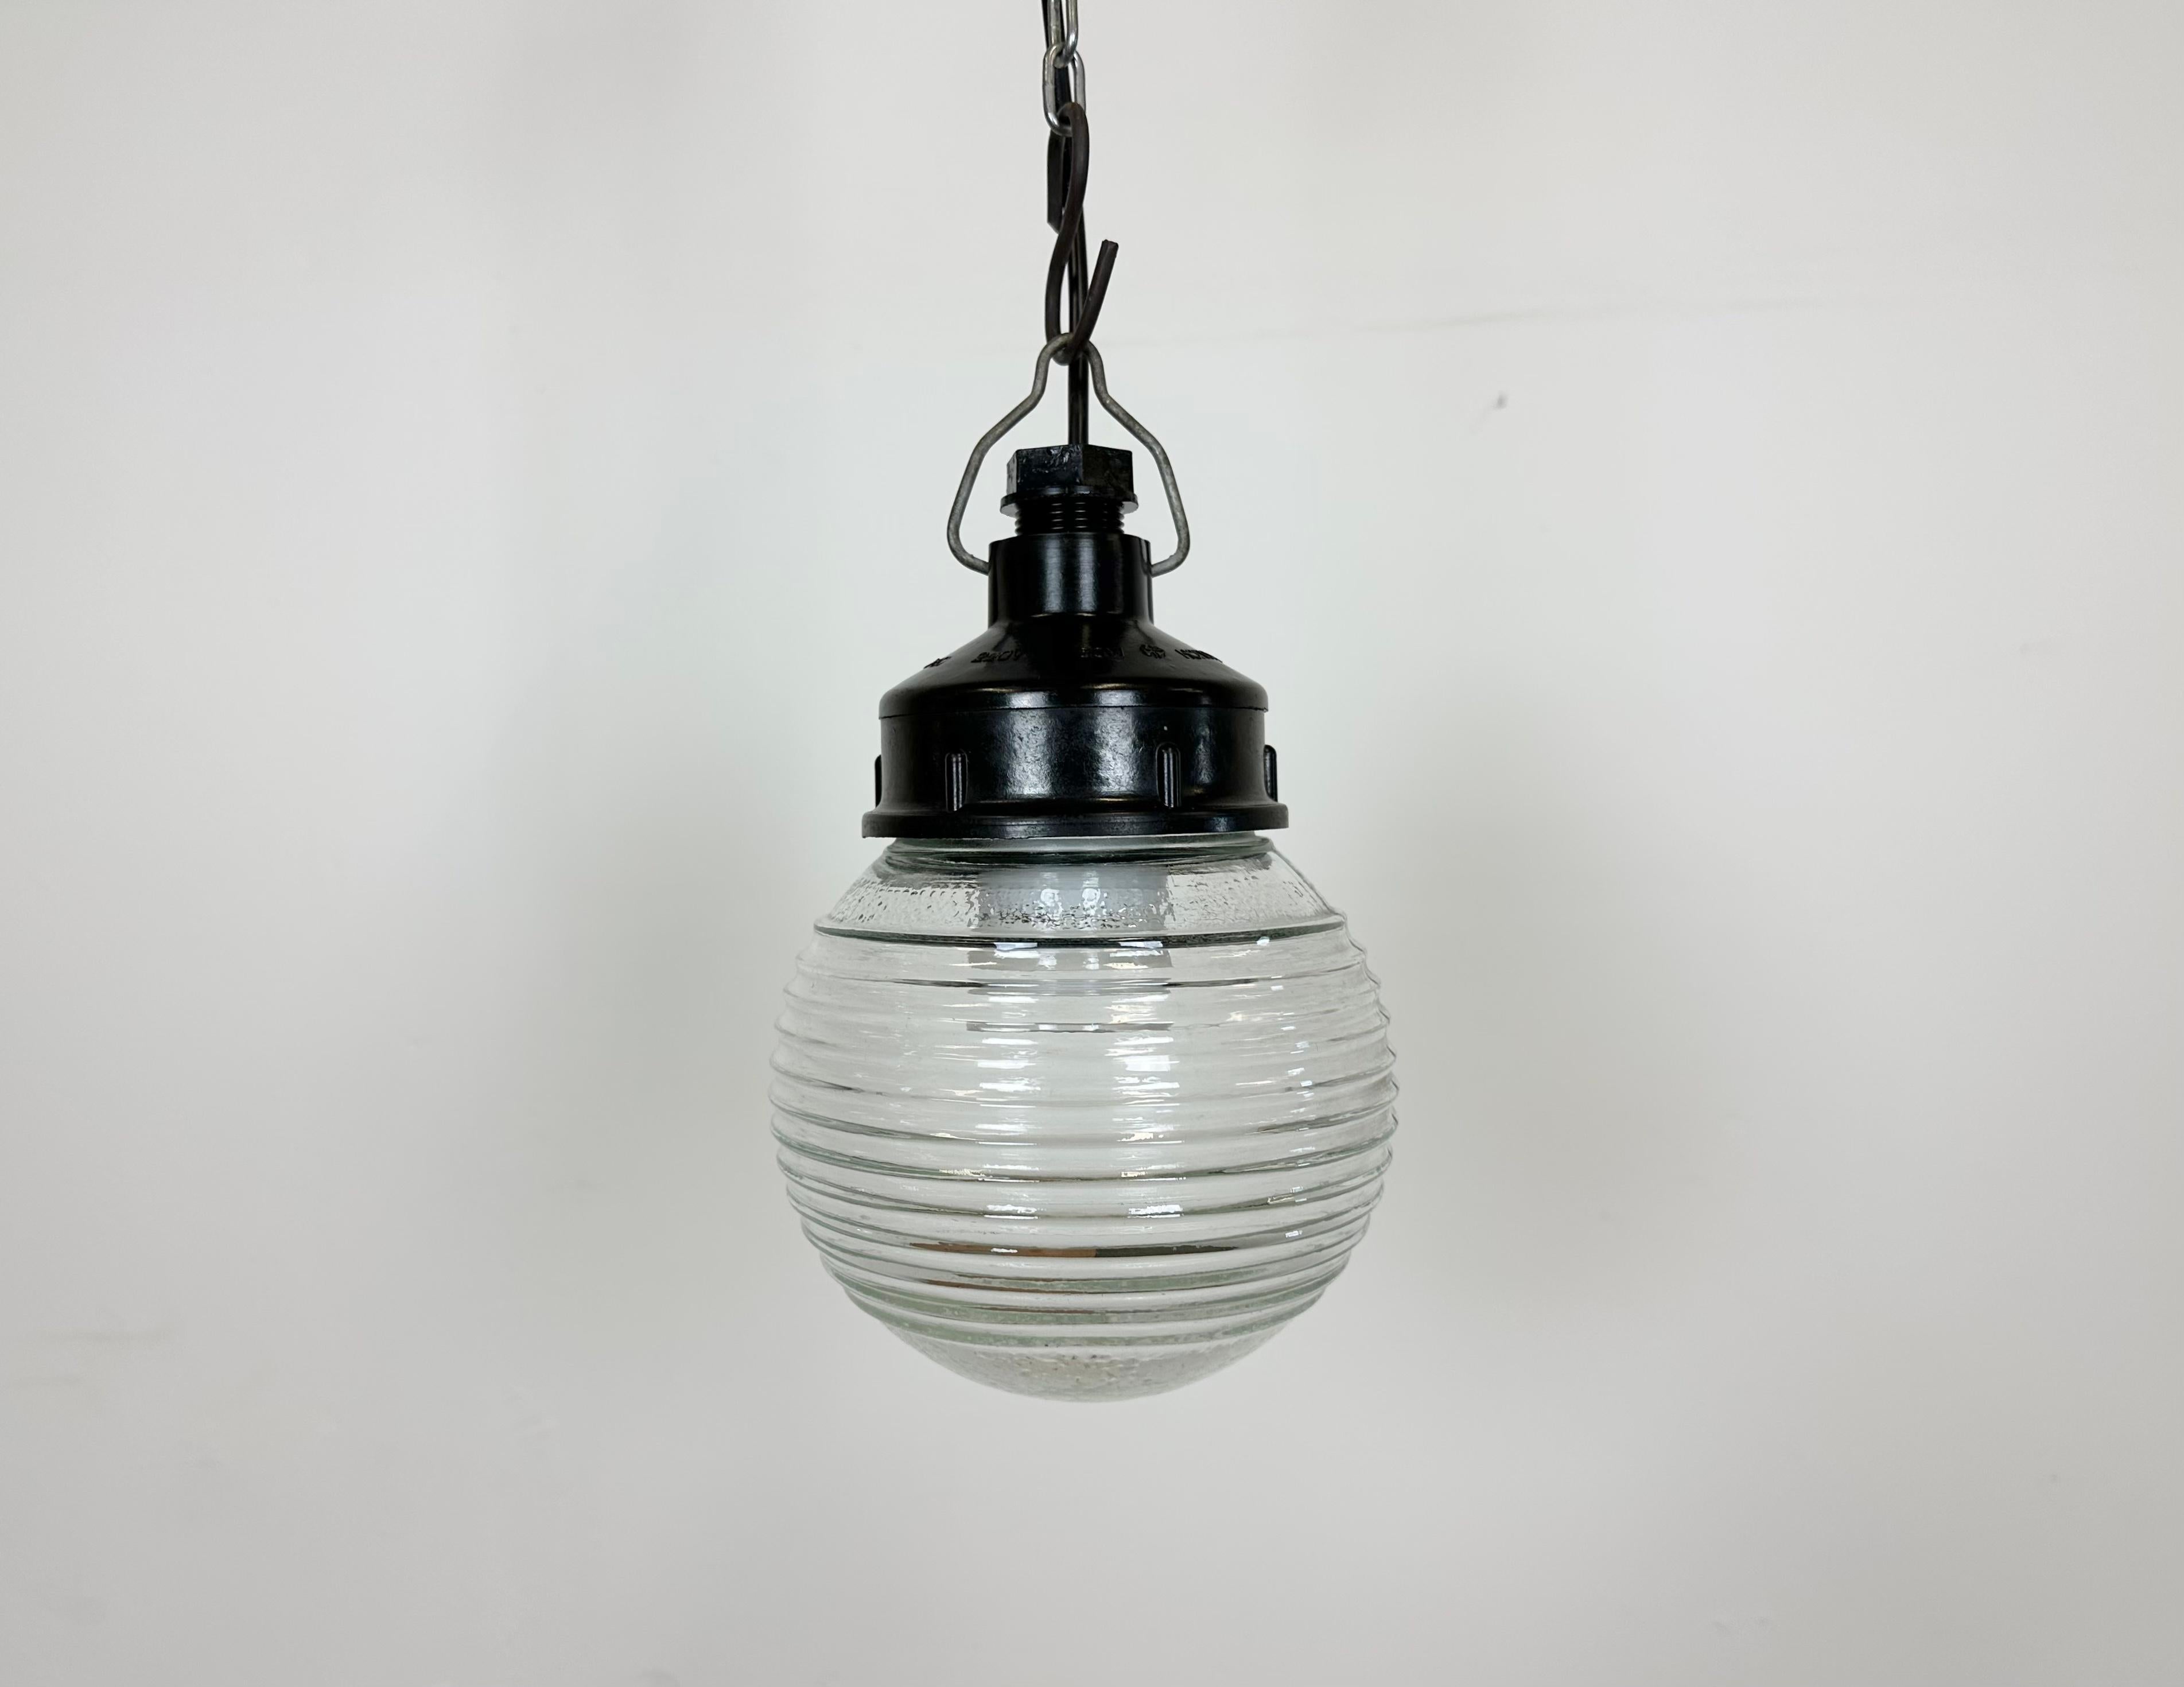 Vintage industrial light made in former Soviet Union during the 1970s. It features a brown bakelite top and a ribbed glass cover. The socket requires E27/ E26 light bulbs. New wire. The weight of the lamp is 0,9 kg.